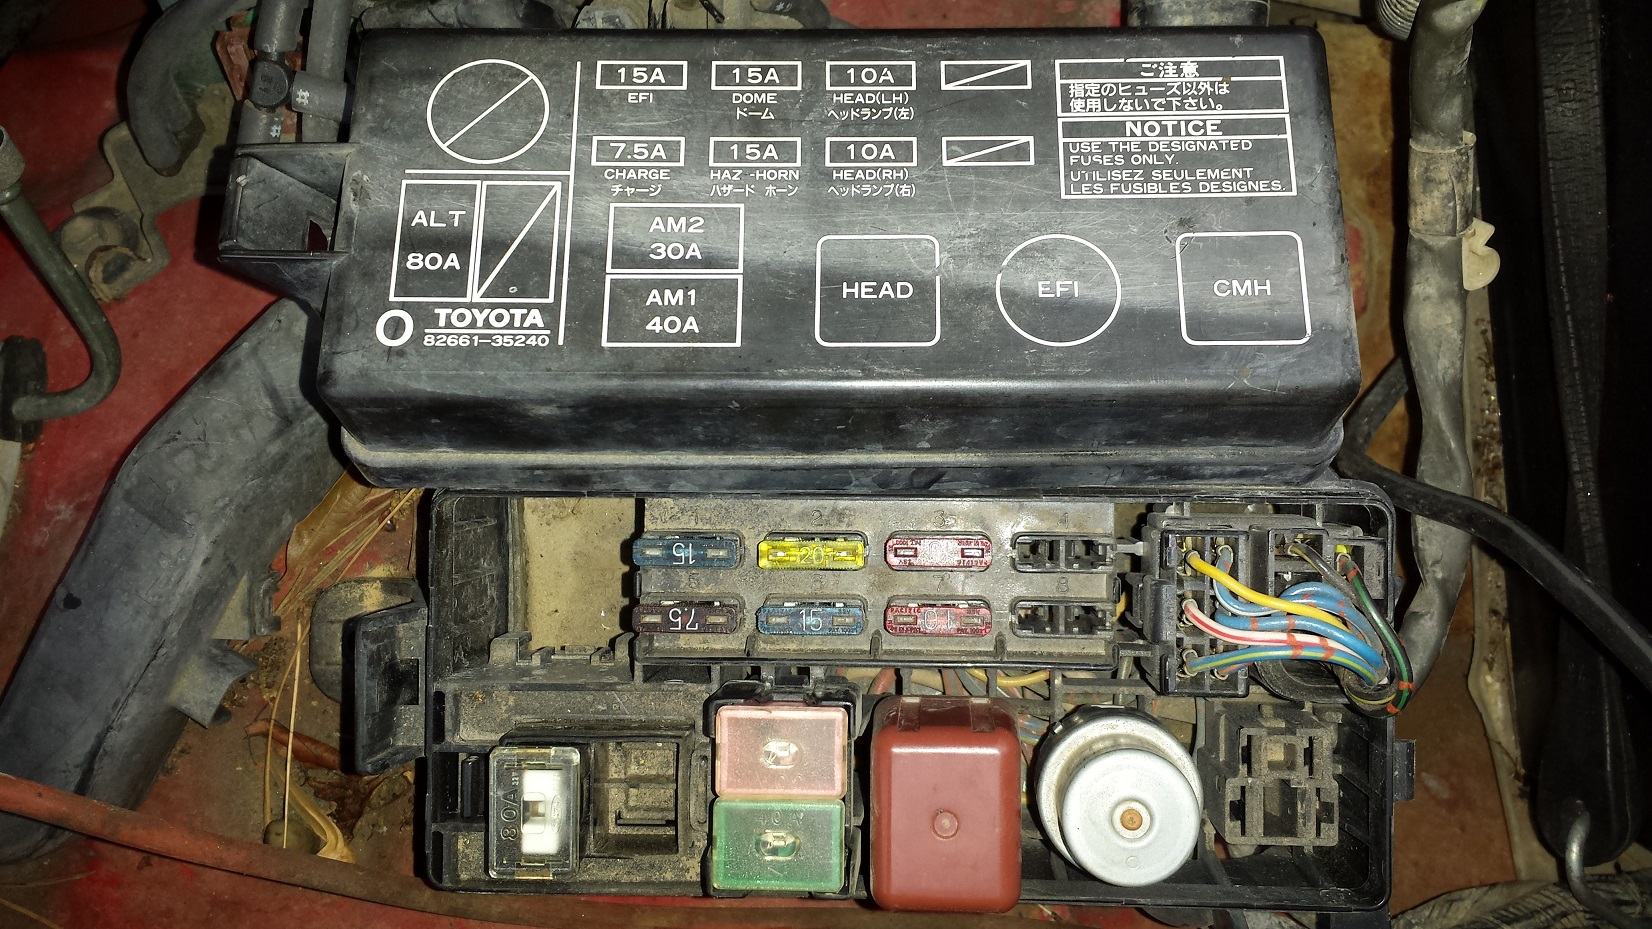 Does '91 3vze use a starter relay? - YotaTech Forums 2002 sequoia fuse box 